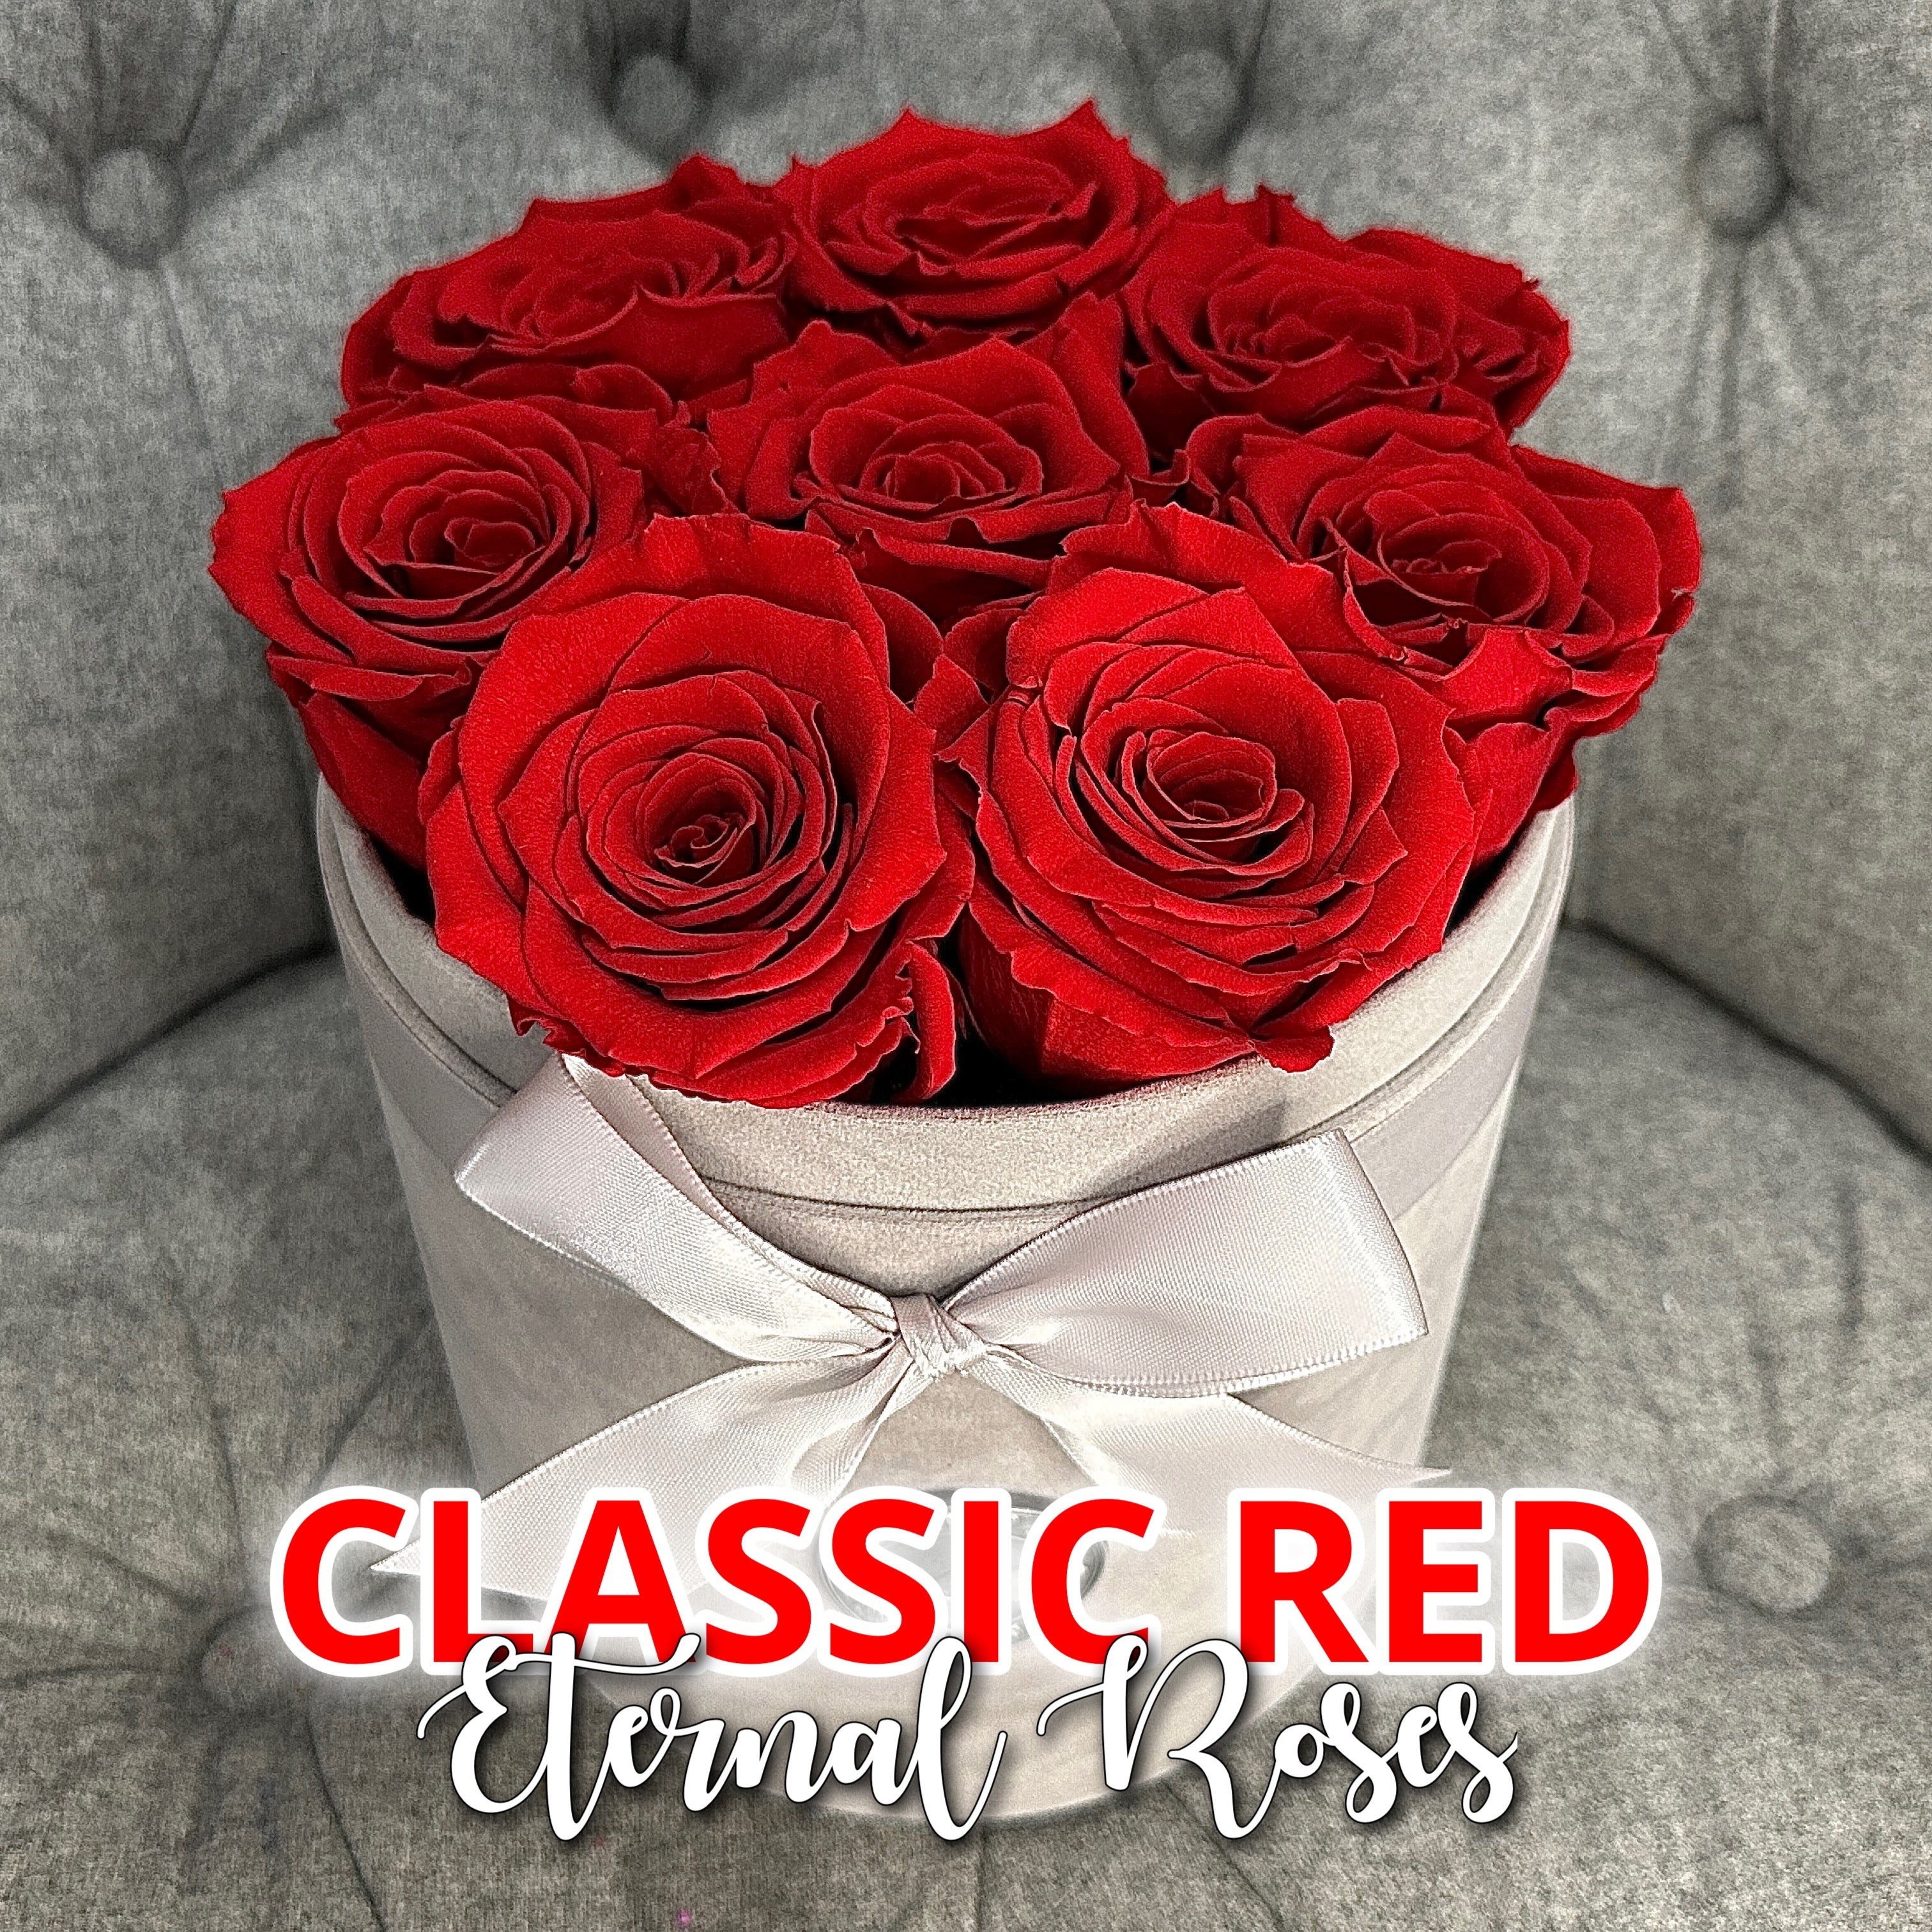 CLASSIC RED ROSES